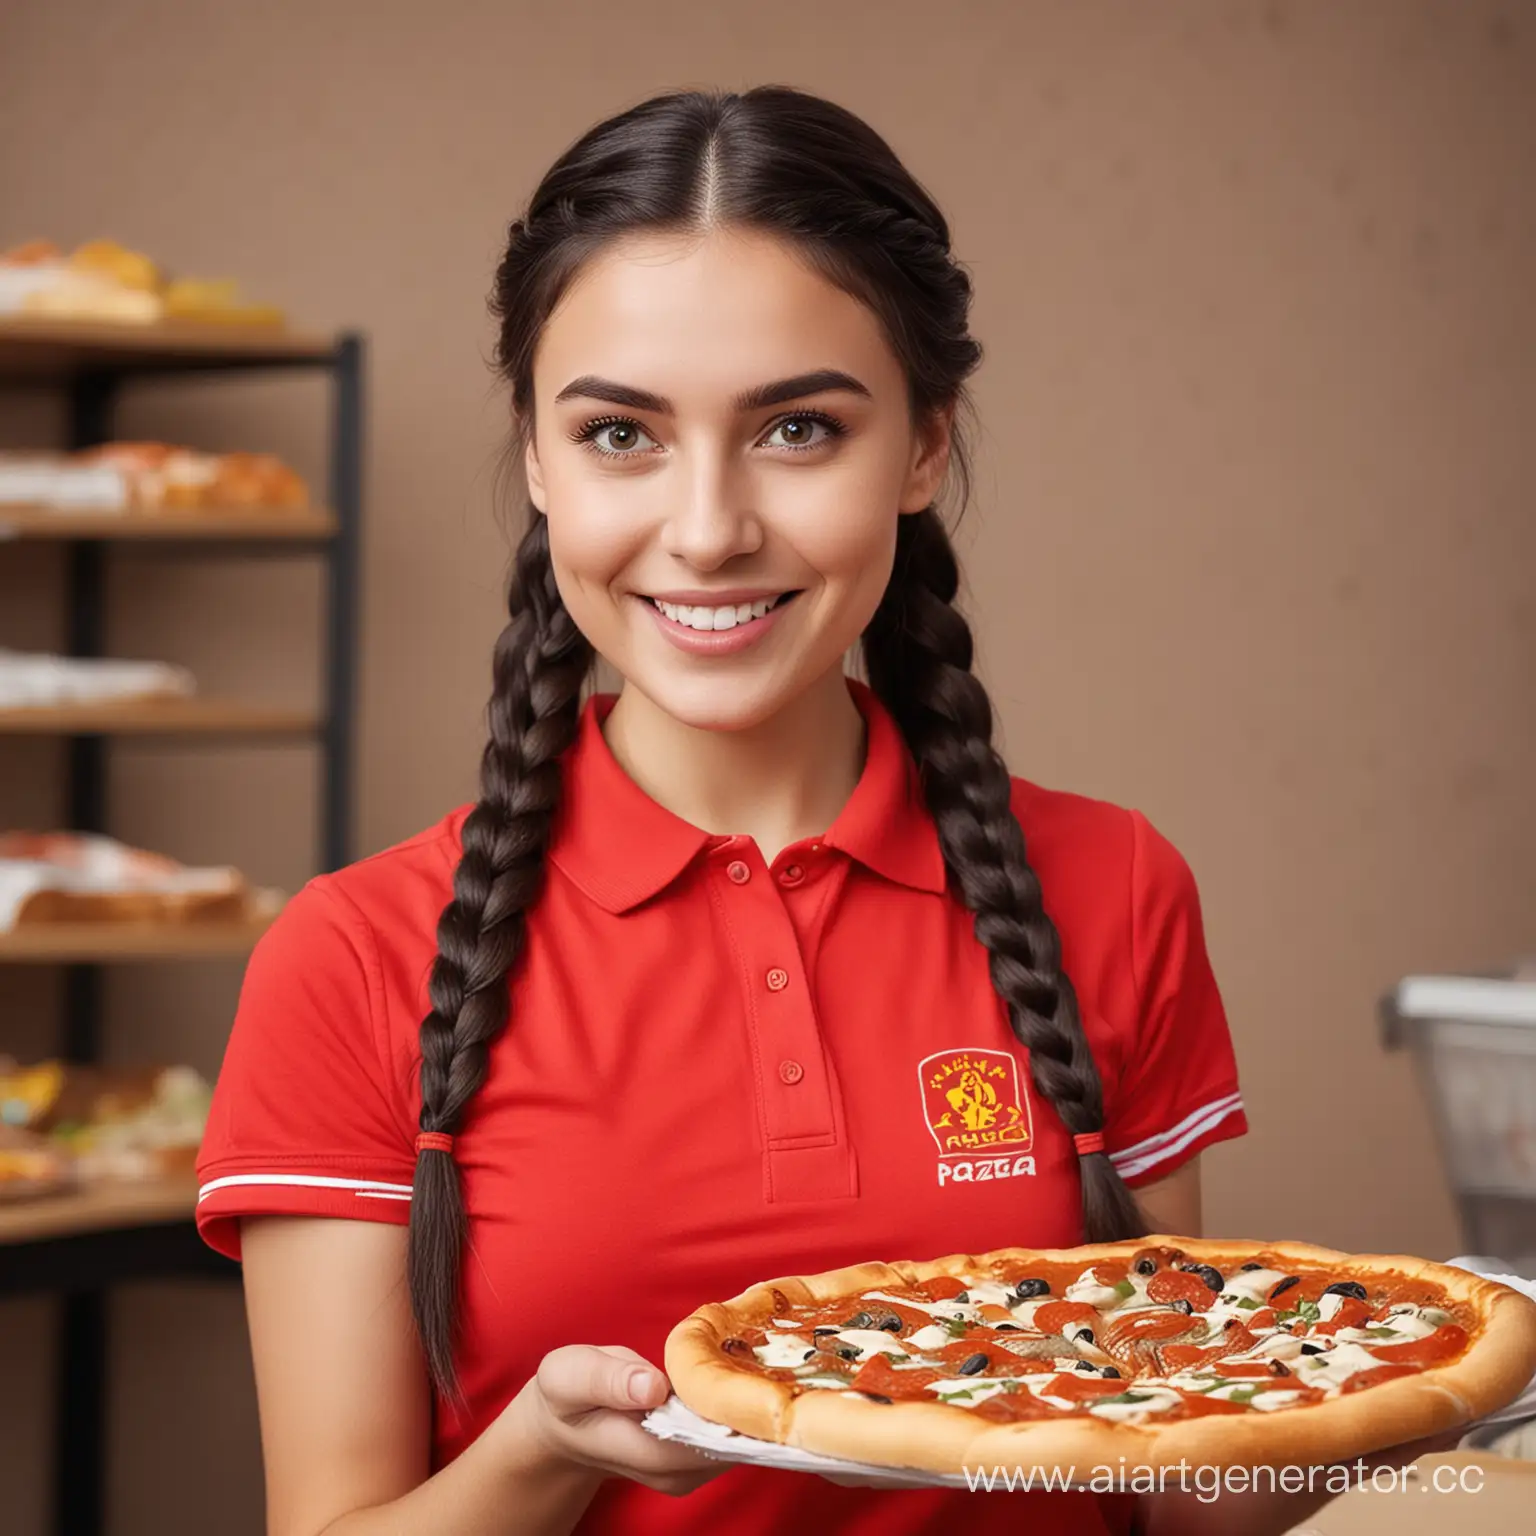 Smiling-Russian-Cashier-Girl-with-Dark-Hair-Serving-Pizza-in-Red-Polo-Tshirt